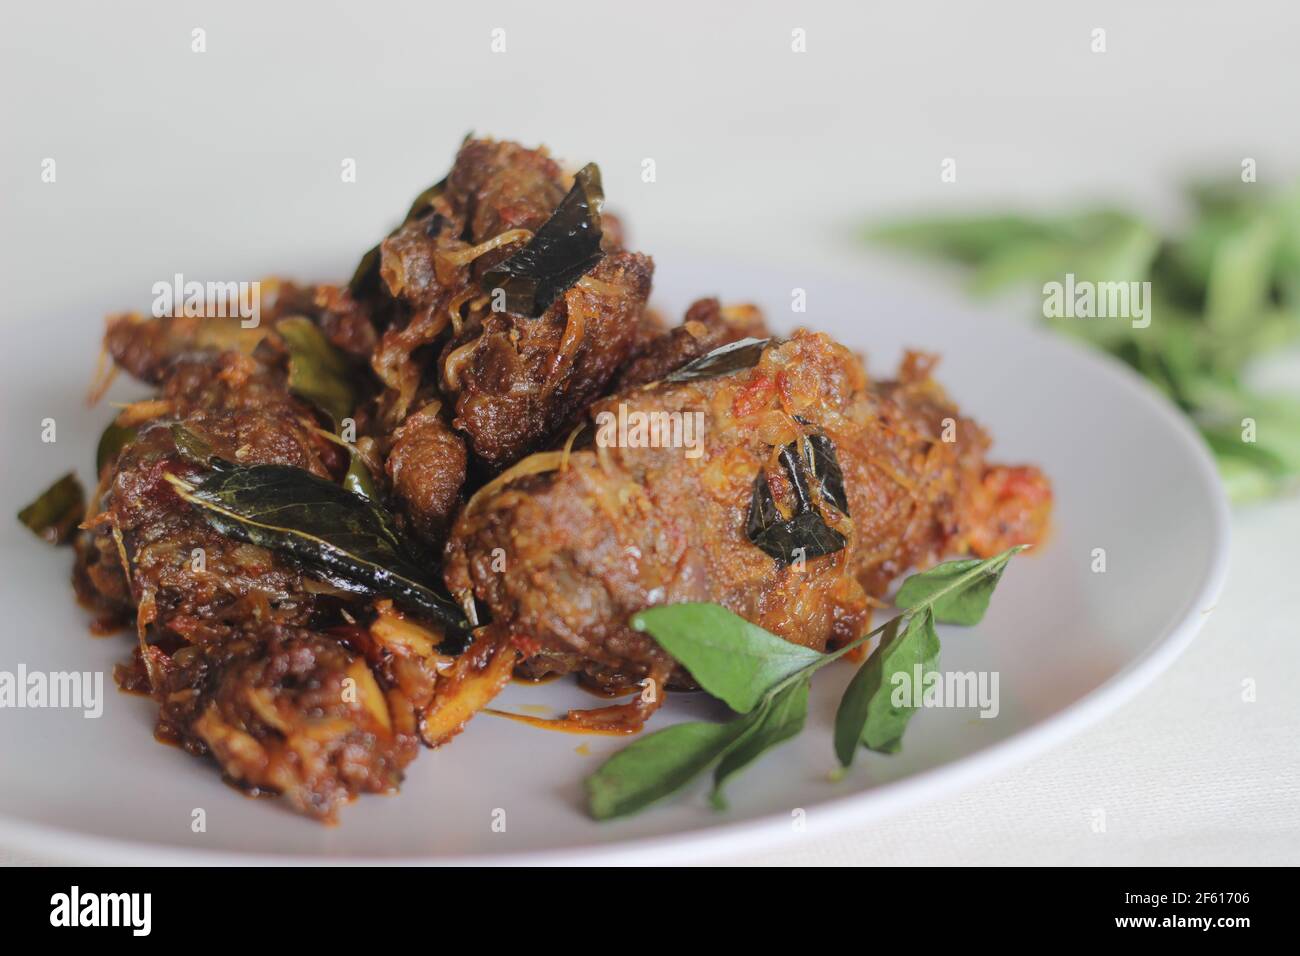 Kerala style mutton roast prepared with coconut oil. Shot on white background Stock Photo